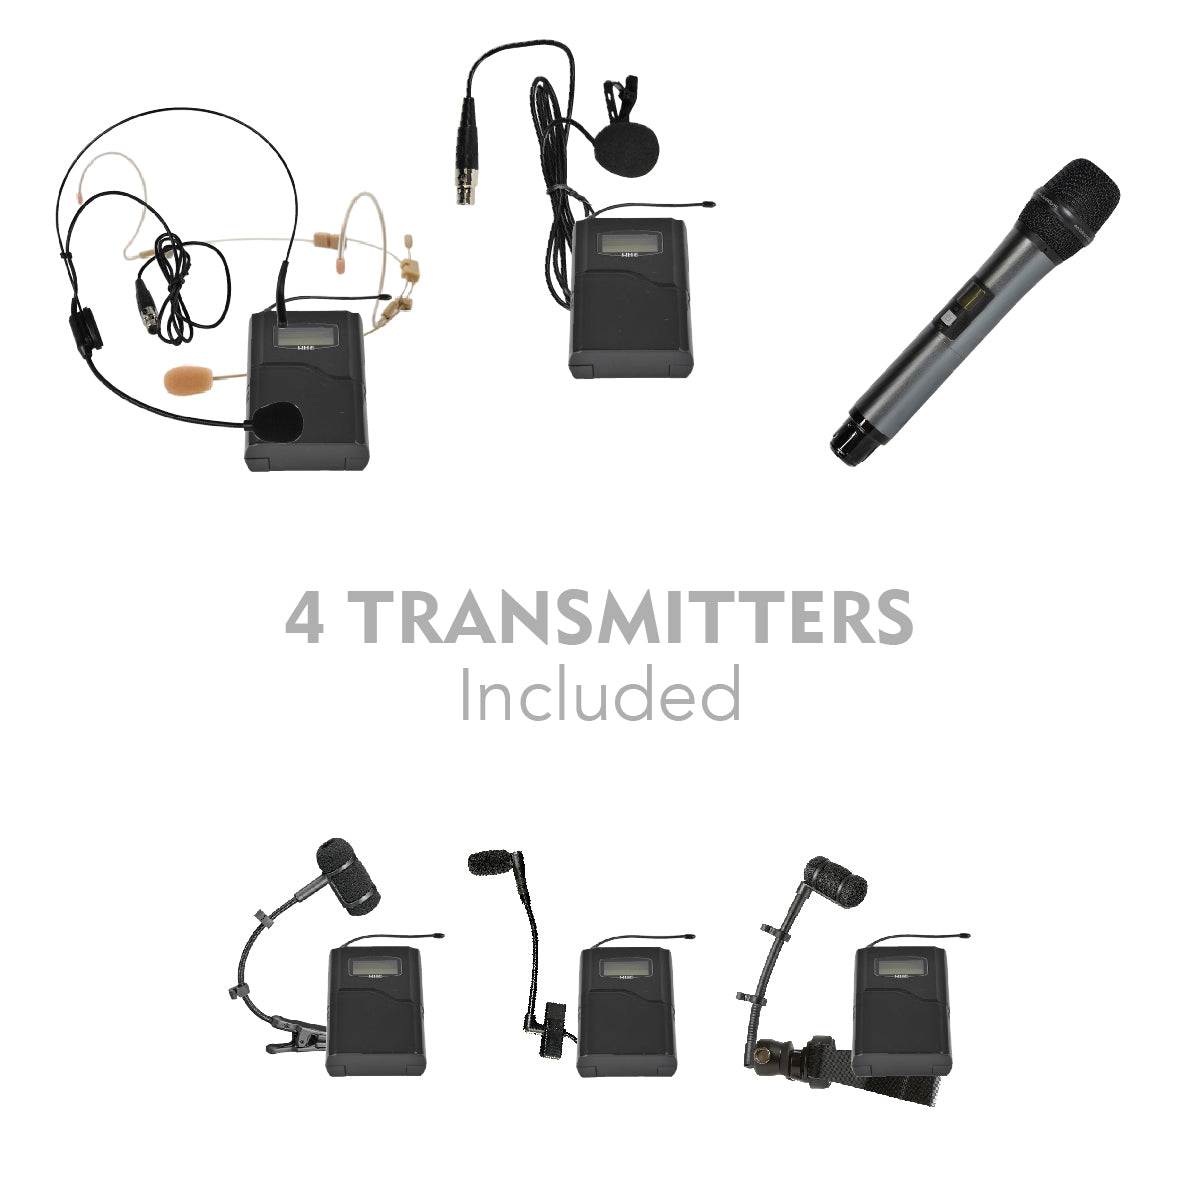 McCormick's Quad Wireless Microphone System